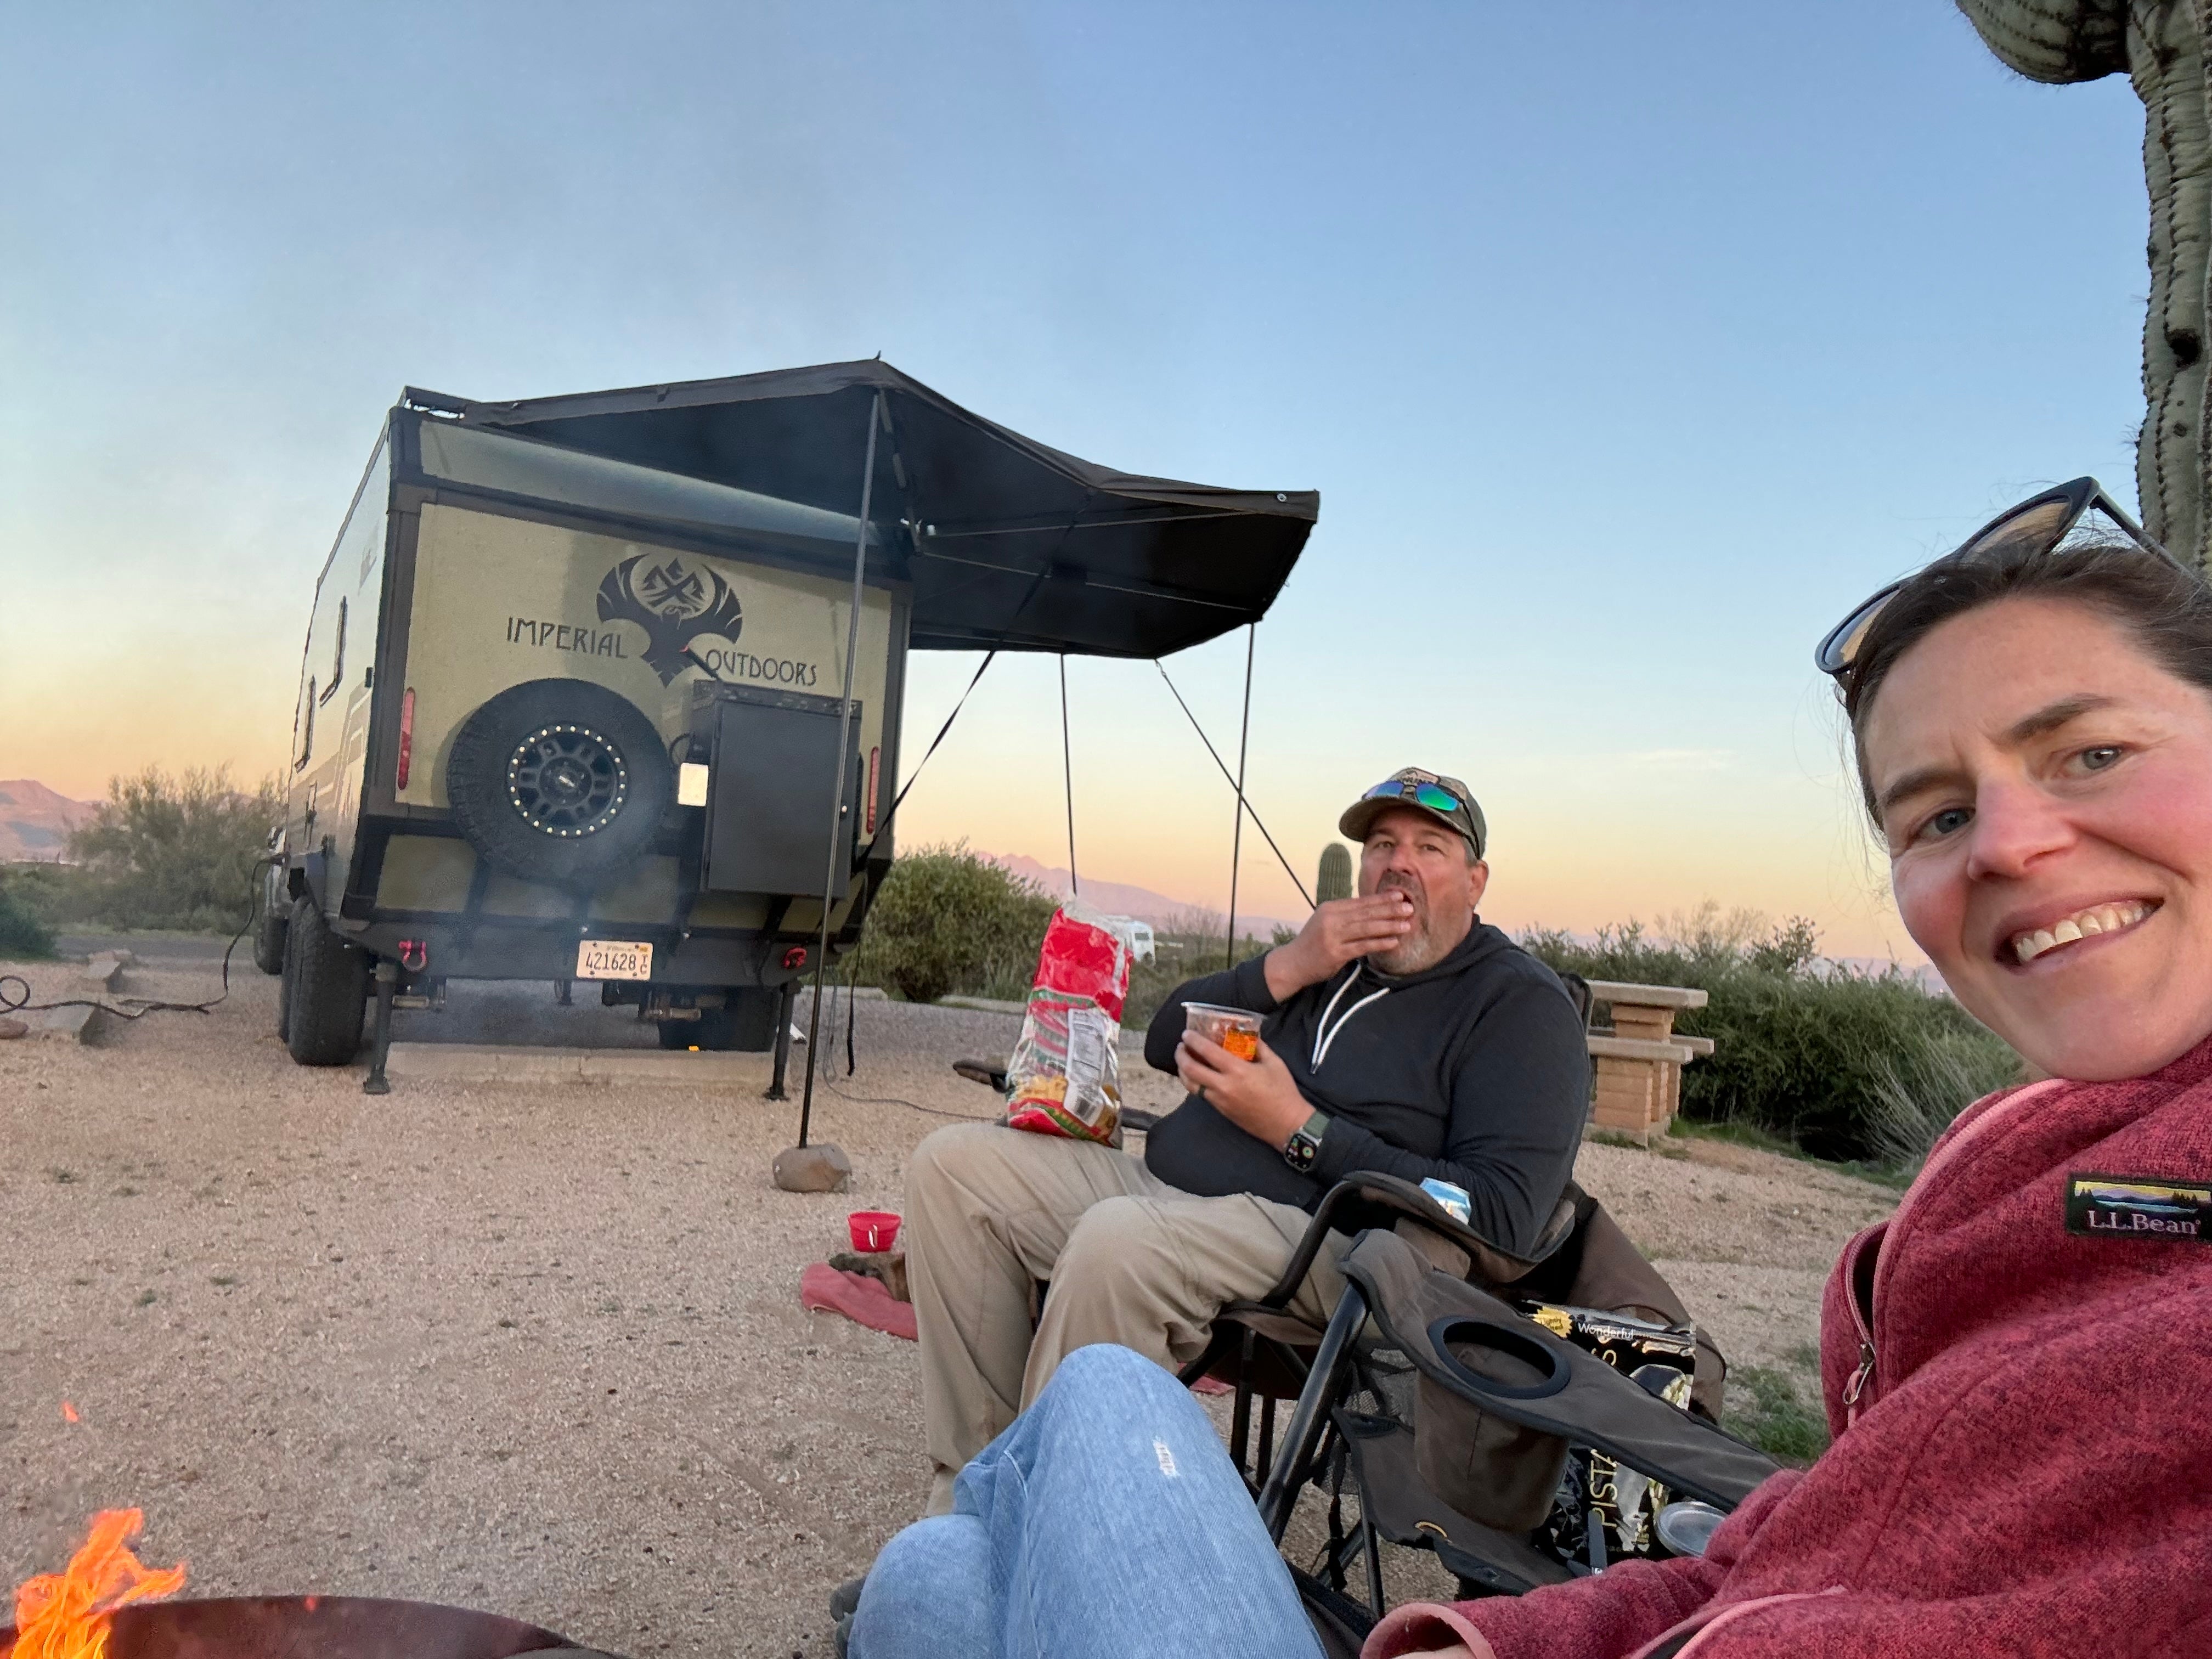 Camper submitted image from McDowell Regional Park-Ironwood - 4